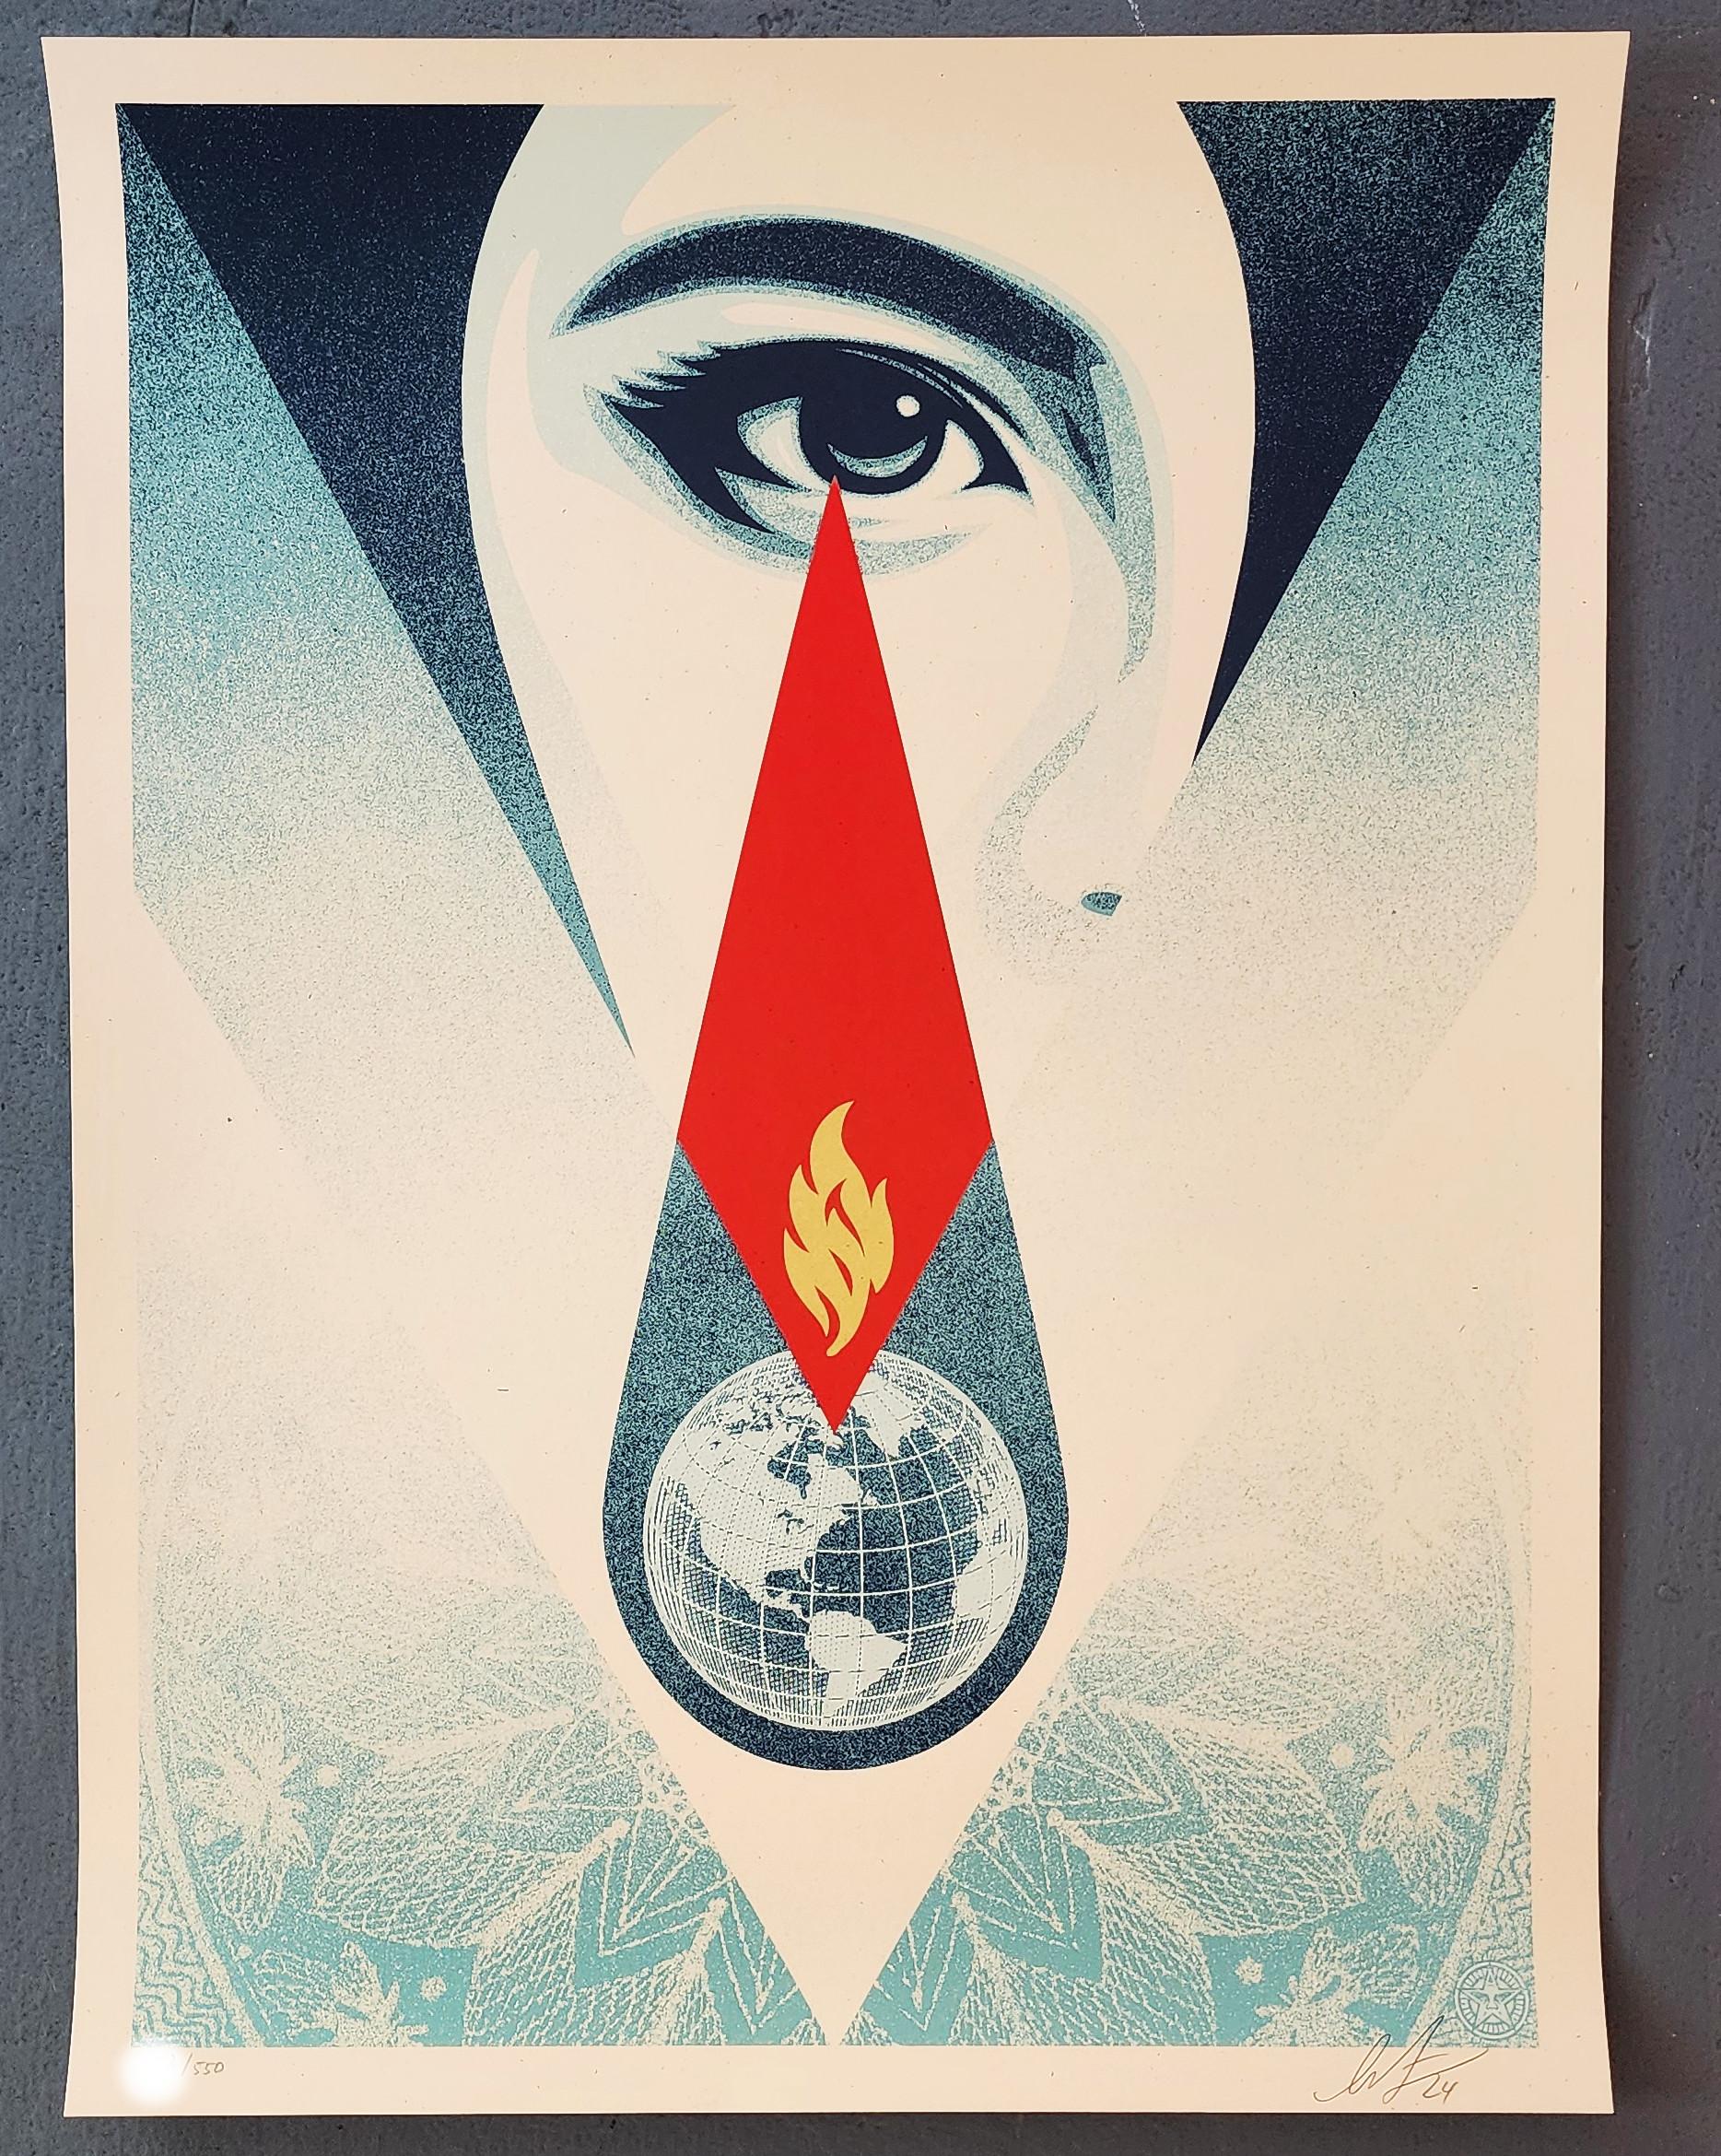 Tear Flame (Mother Earth, Rebellious, Defiant, Guilt, ~30% OFF - LIMITED TIME) - Contemporary Print by Shepard Fairey